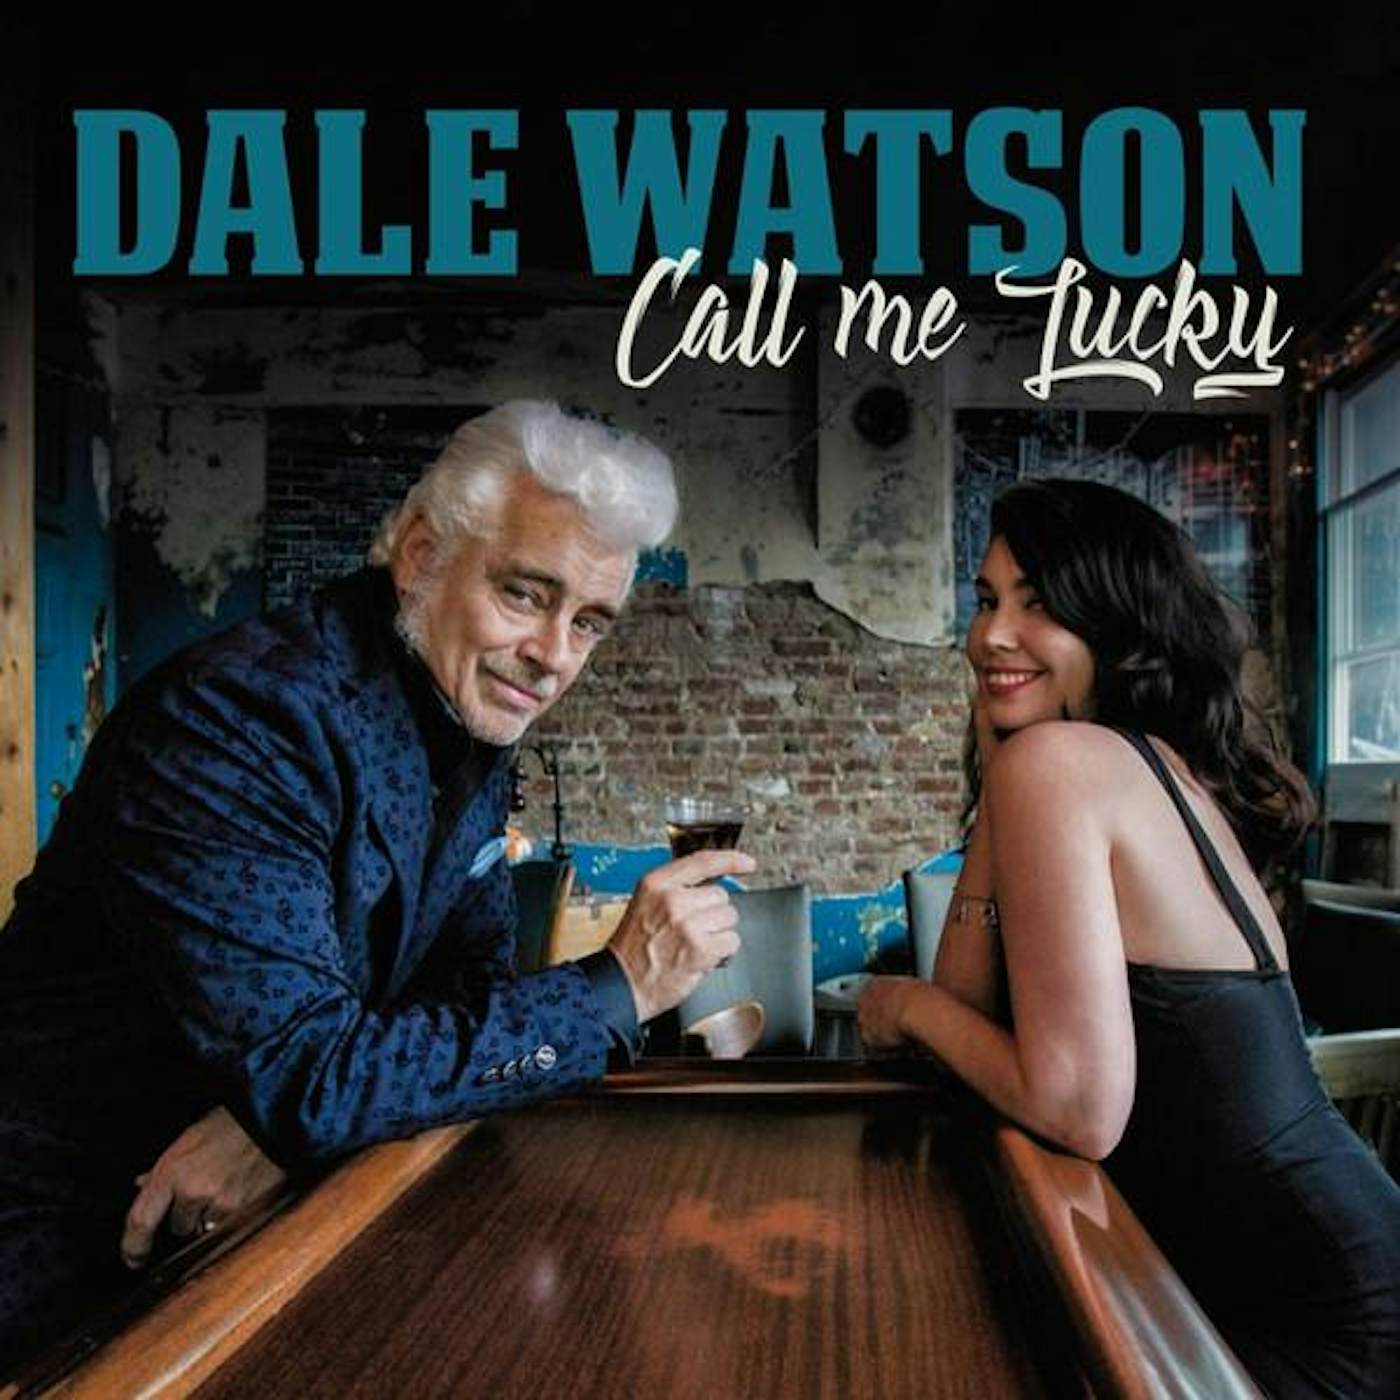 Dale Watson Call Me Lucky Vinyl Record